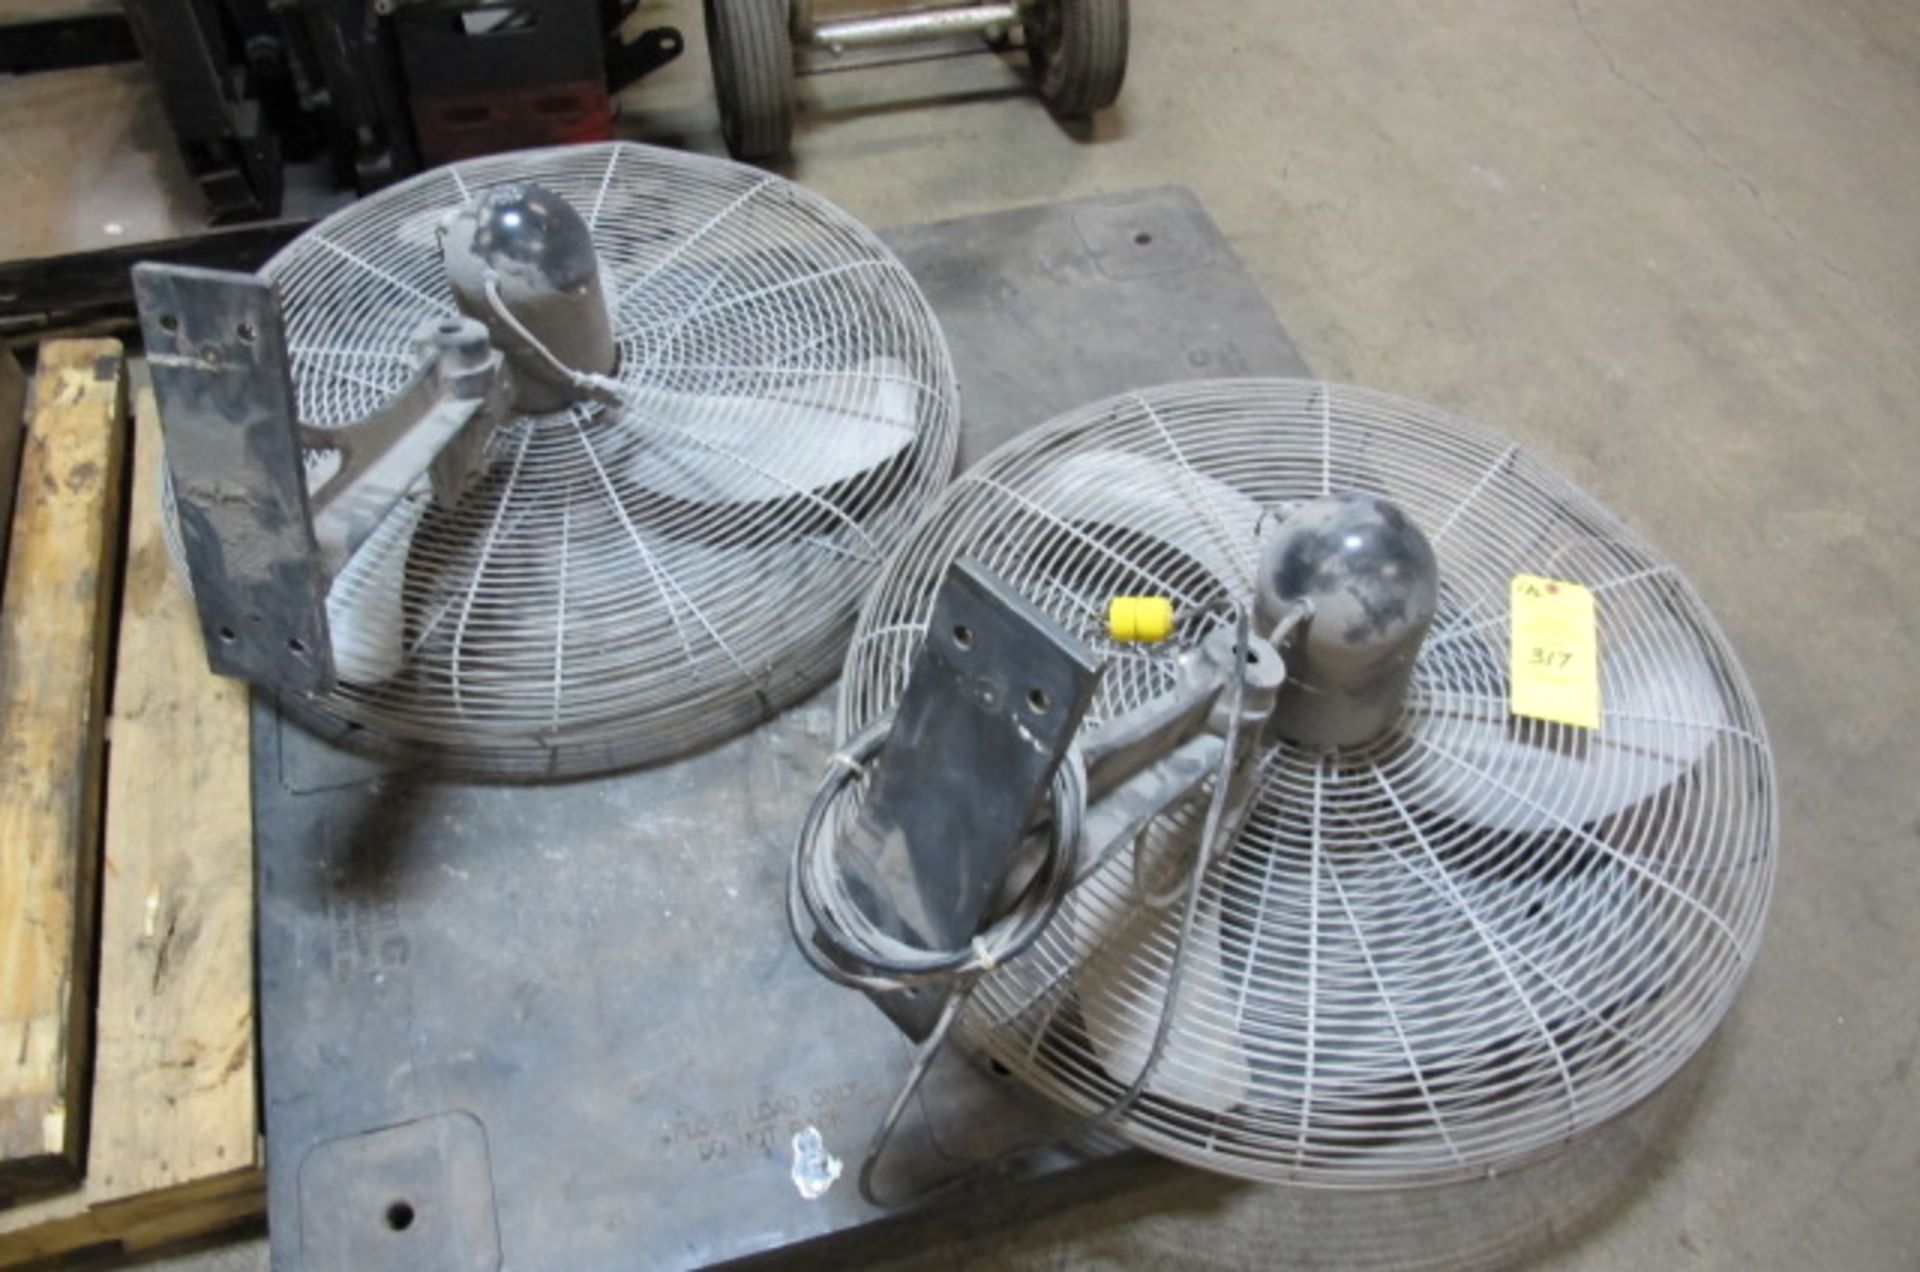 (2) 30" INDUSTRIAL FANS 7665 OH 120, Lyons, Ohio 43523 - all Gaylord plastic pallets are NOT